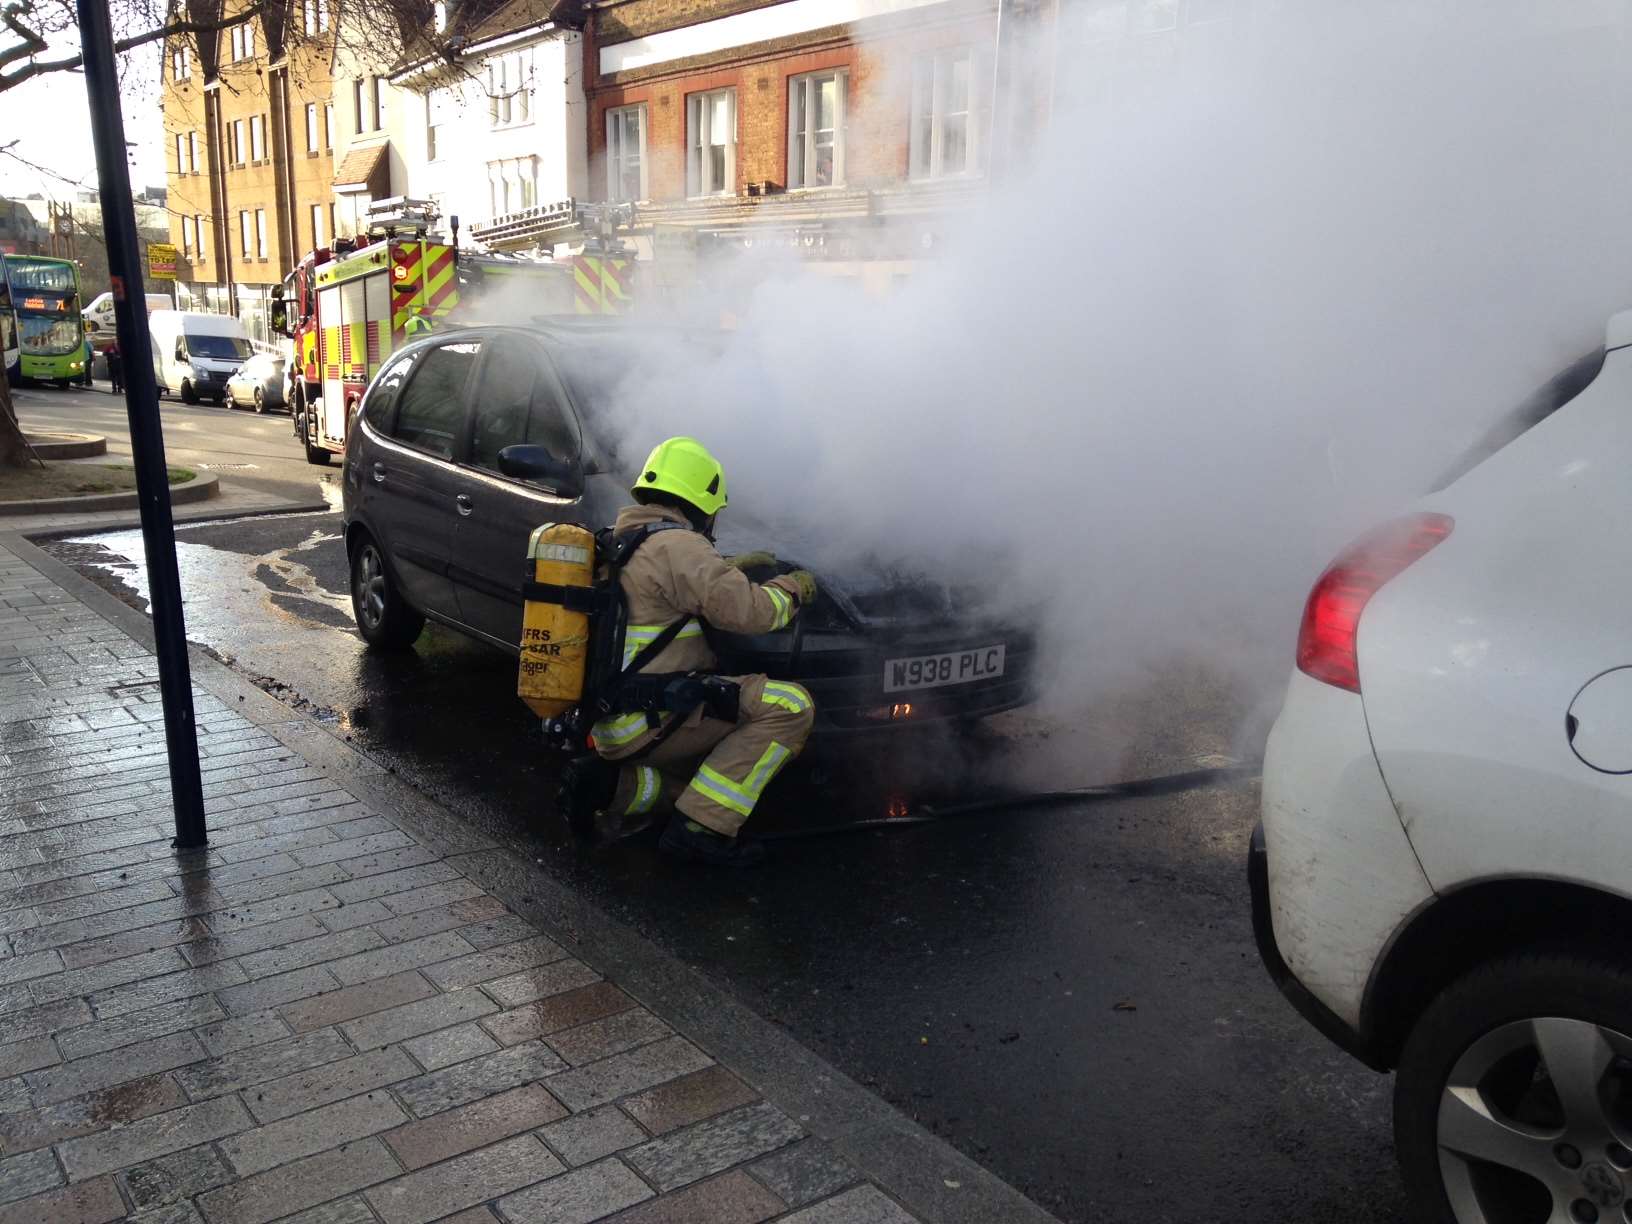 The car was well alight by the time firefighters arrived.